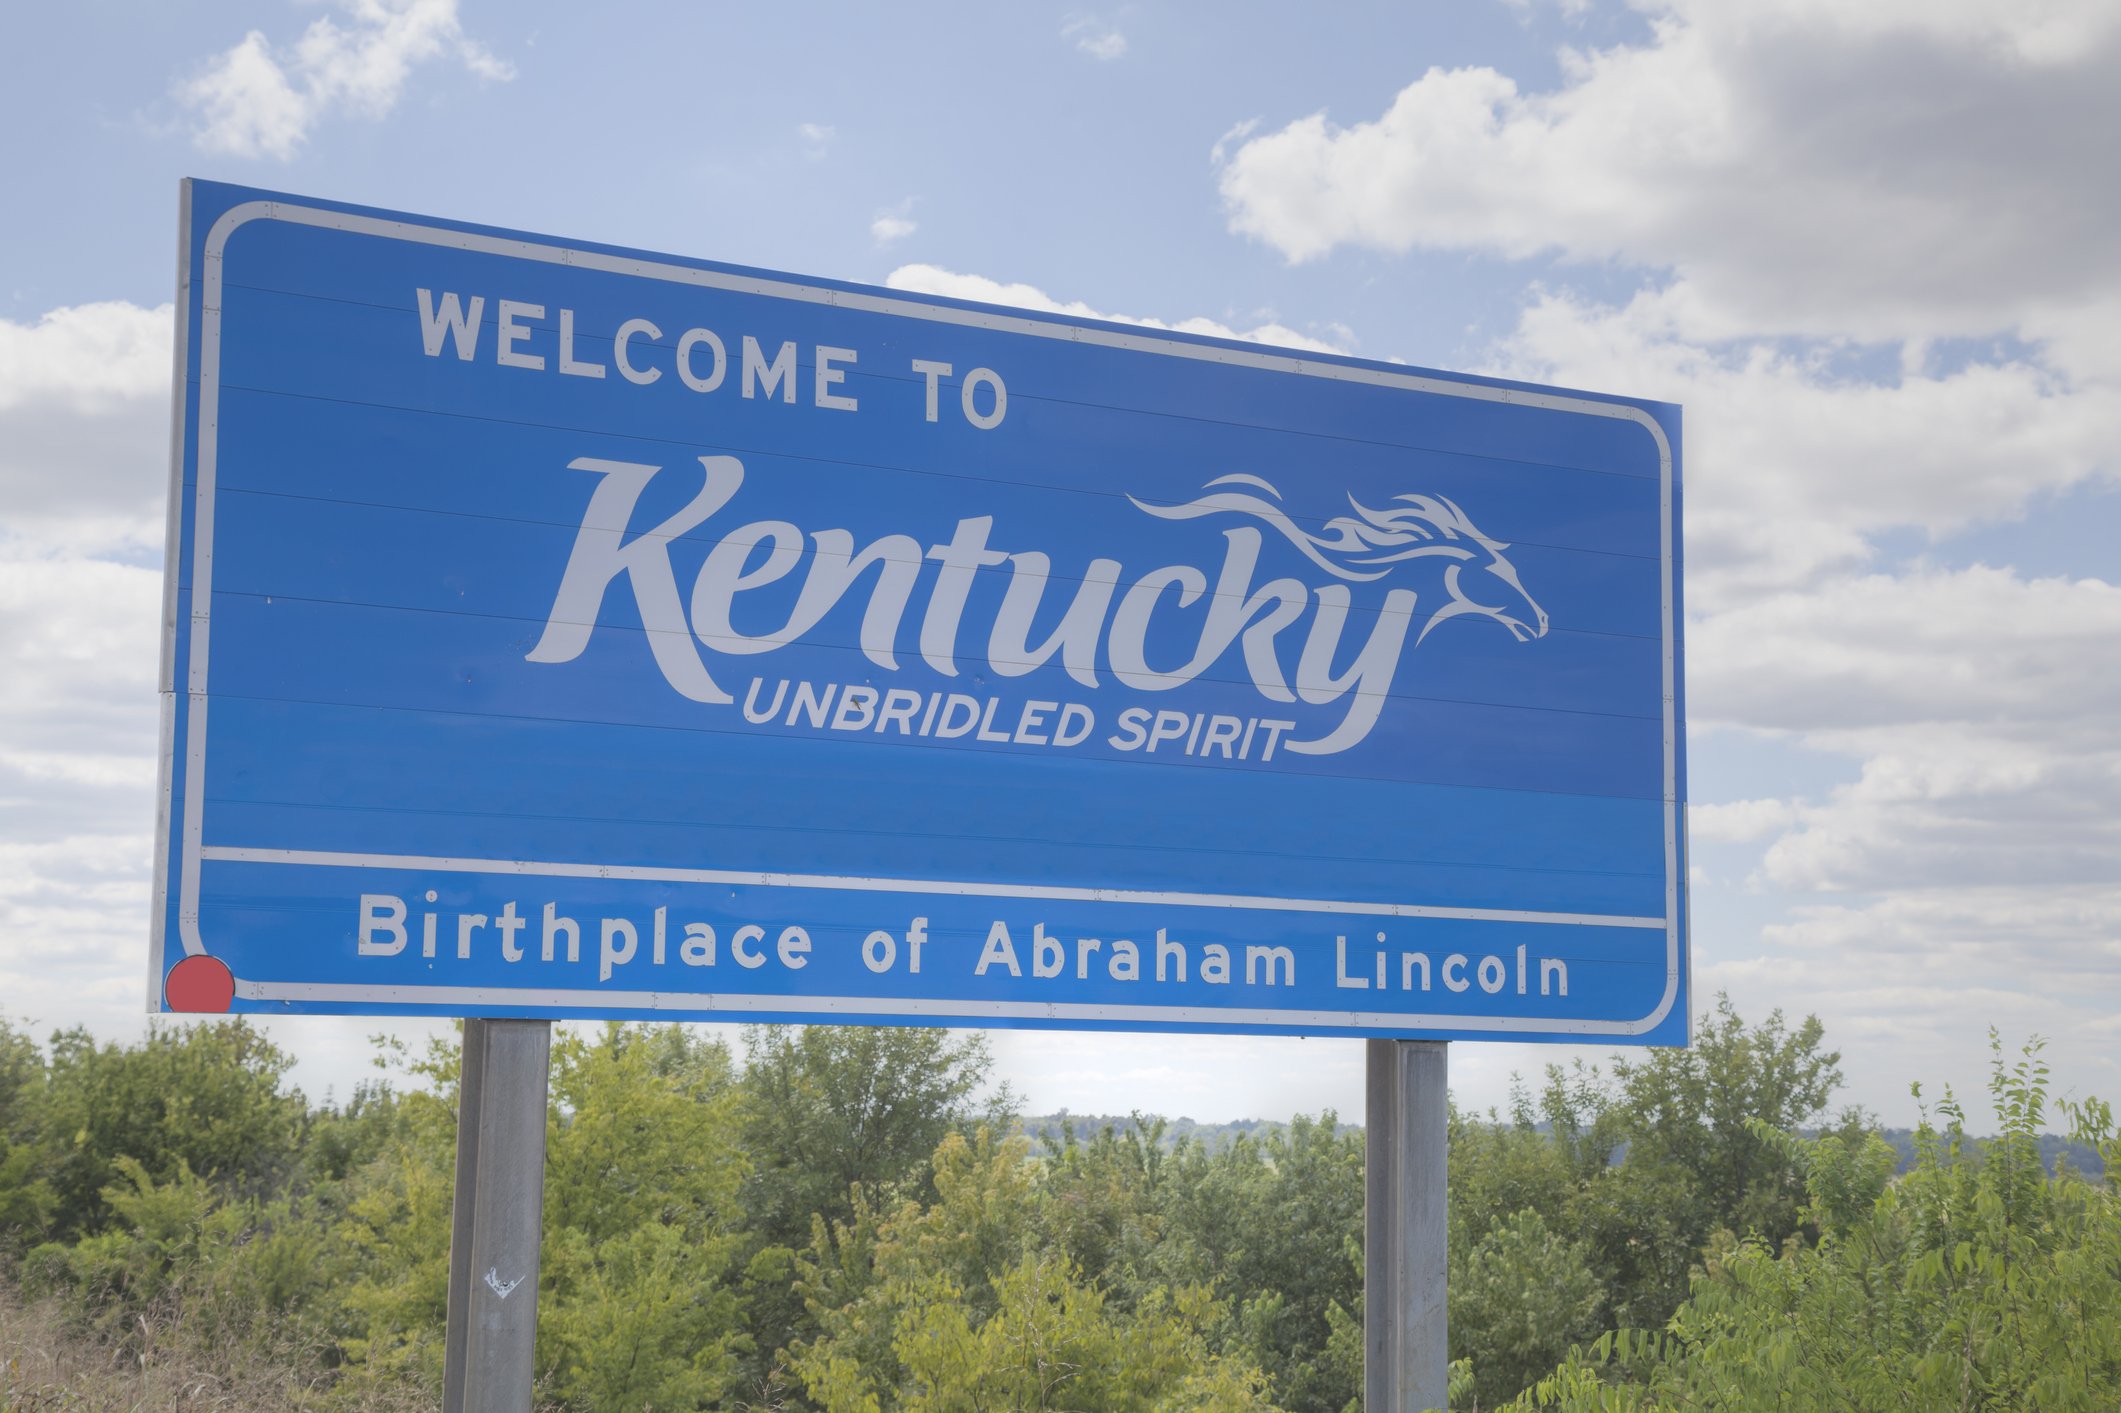 Welcome to Kentucky road sign at the state border.